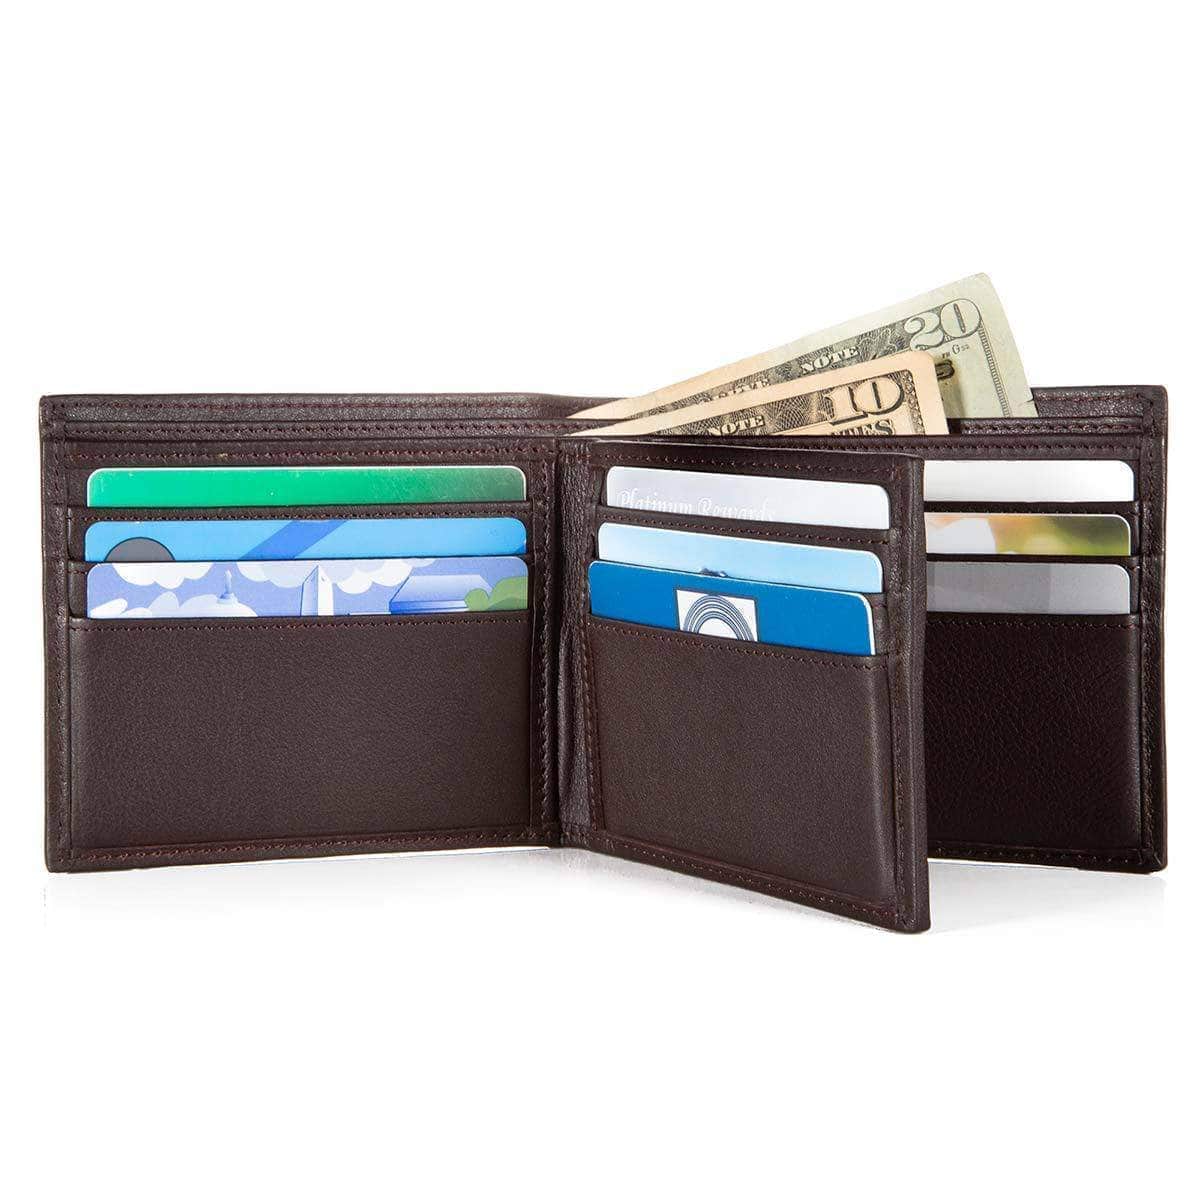 Black Premium Leather Trifold Wallet with ID Window